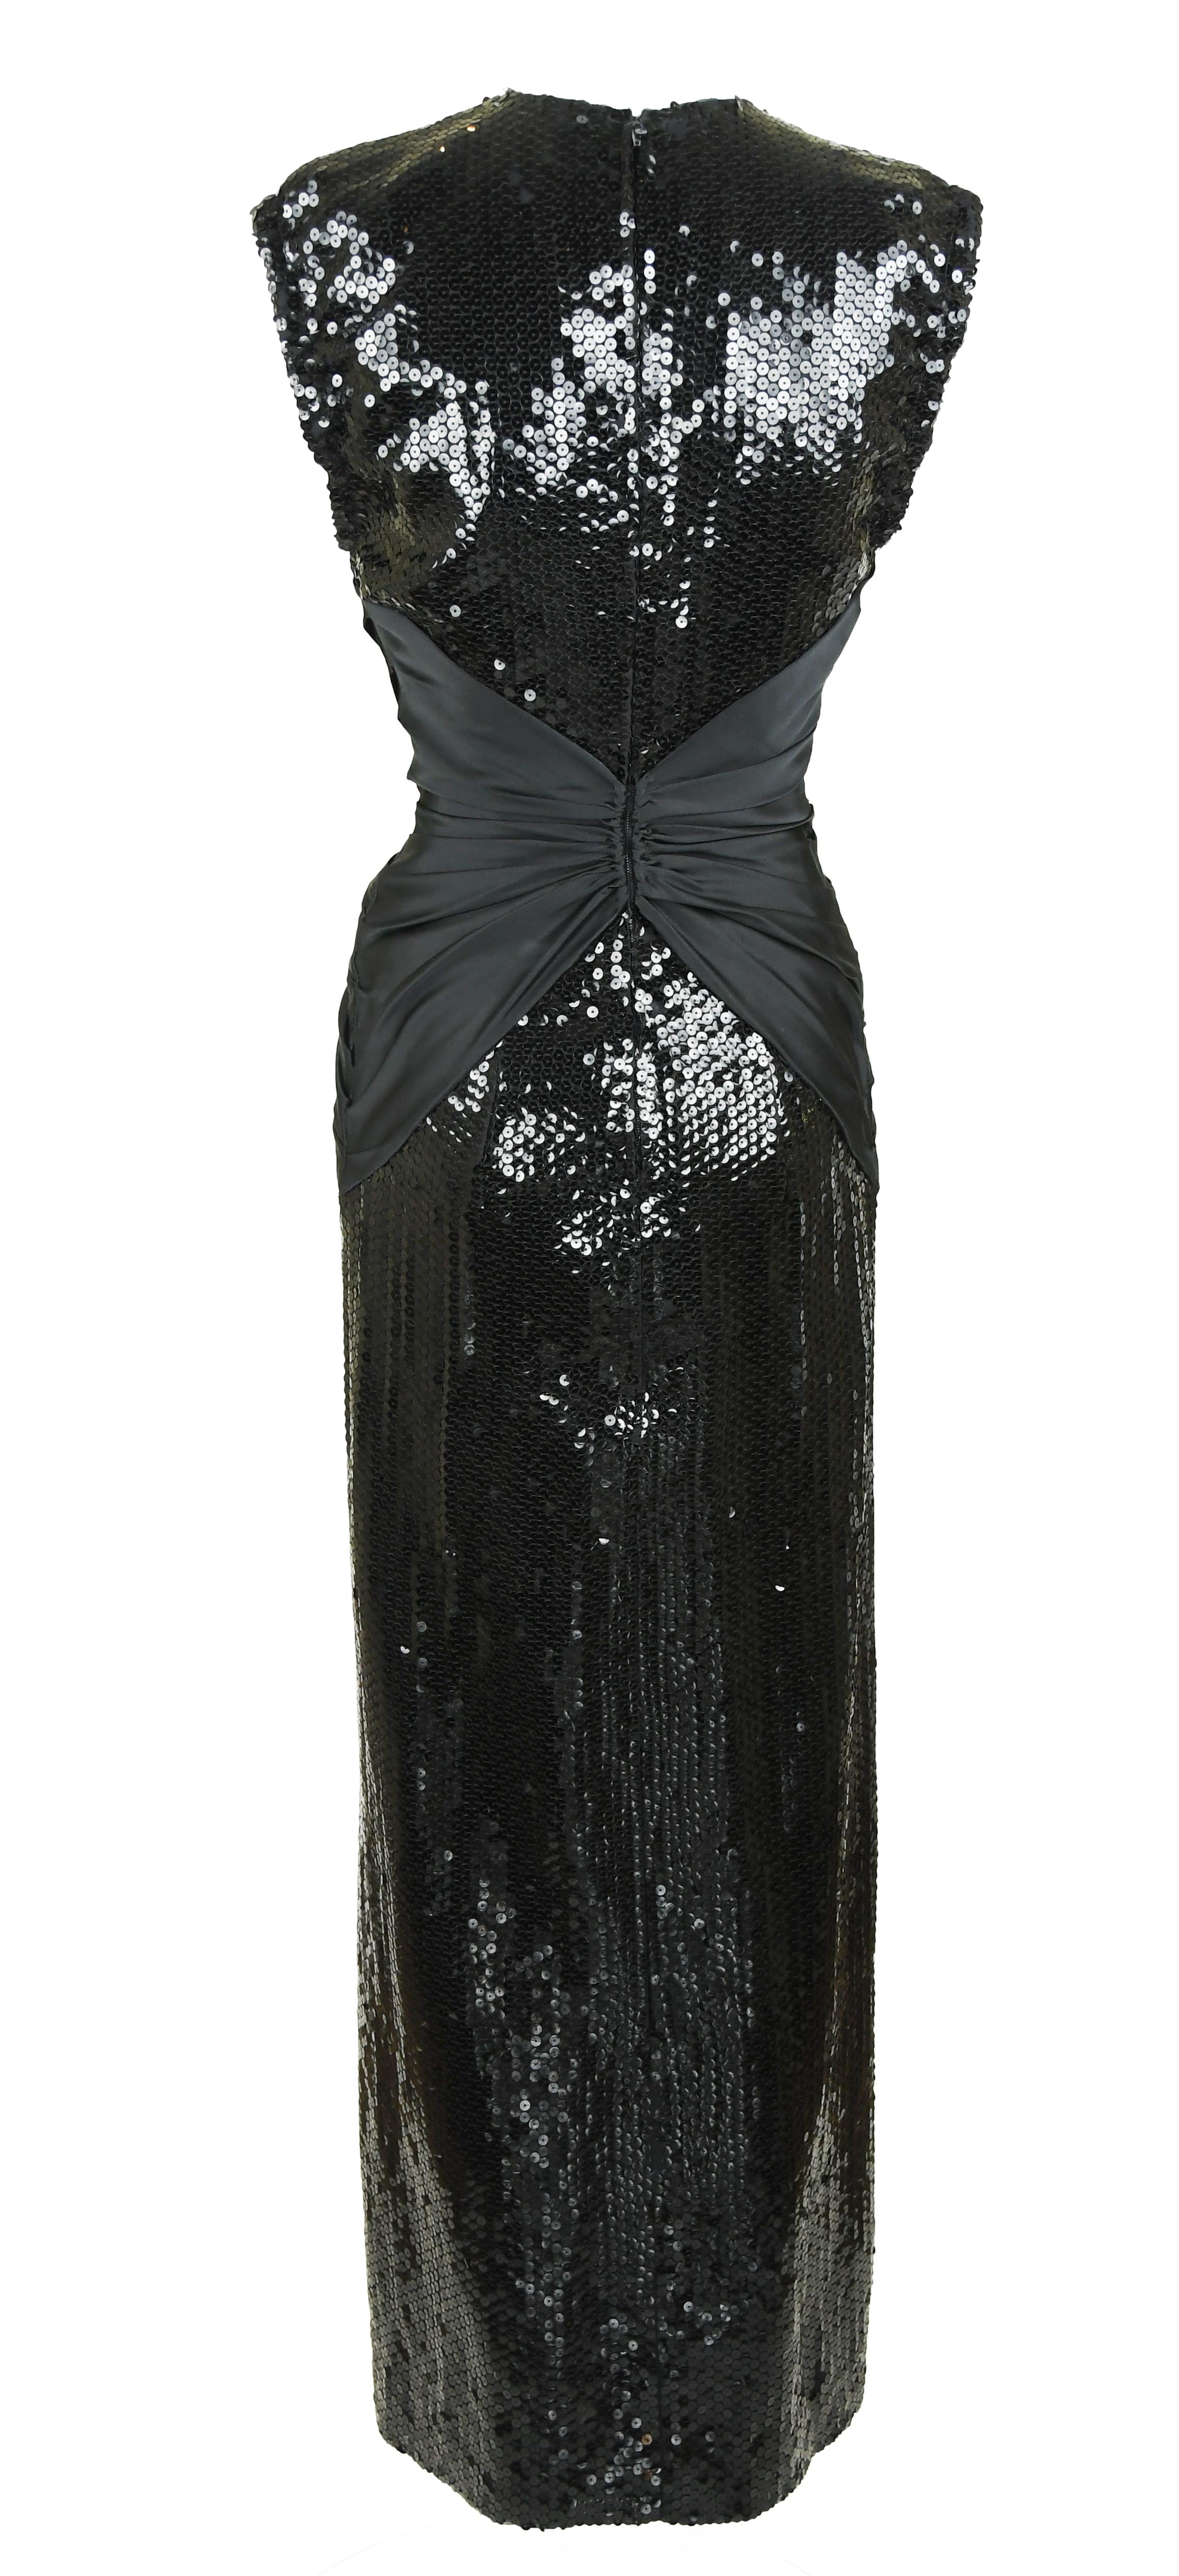 Stand out at your next black tie function with this incredibly rare and gorgeous vintage Azzaro gown.  Black sequins with a gathered black silk sash around the waist and a deep v neckline.

Size: No size but approximate S

Condition: Good vintage